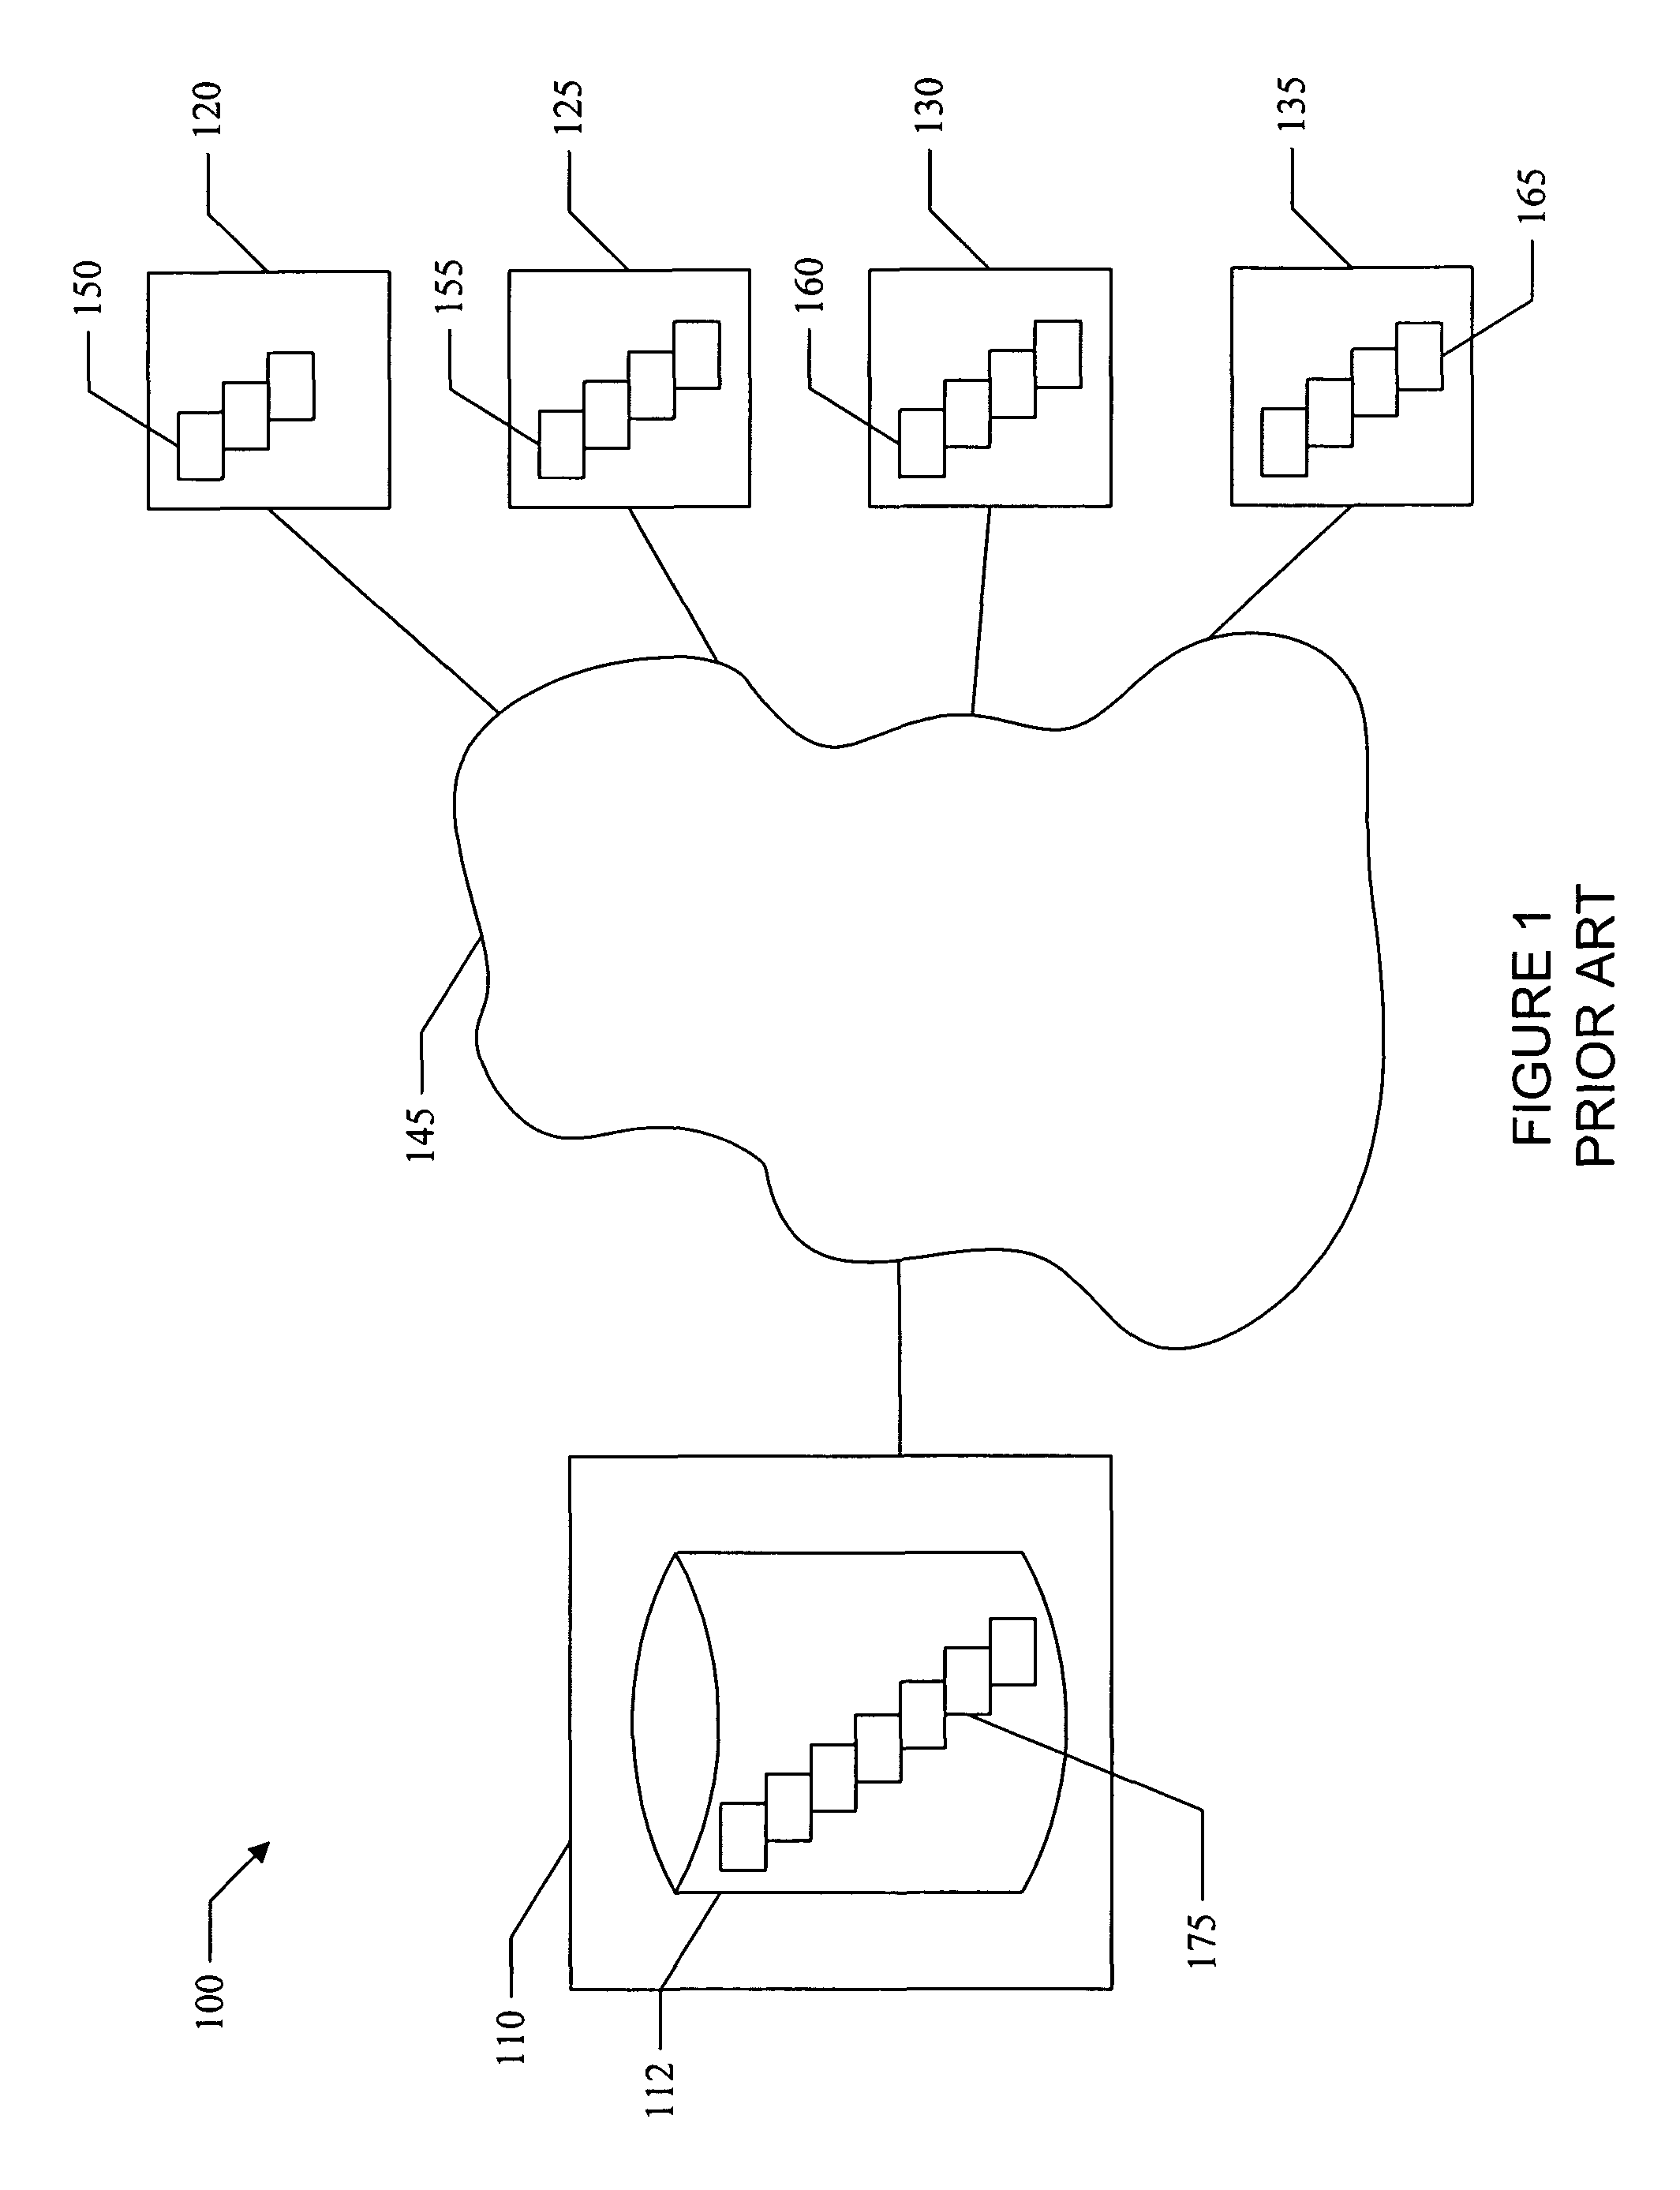 System and method for managing information objects